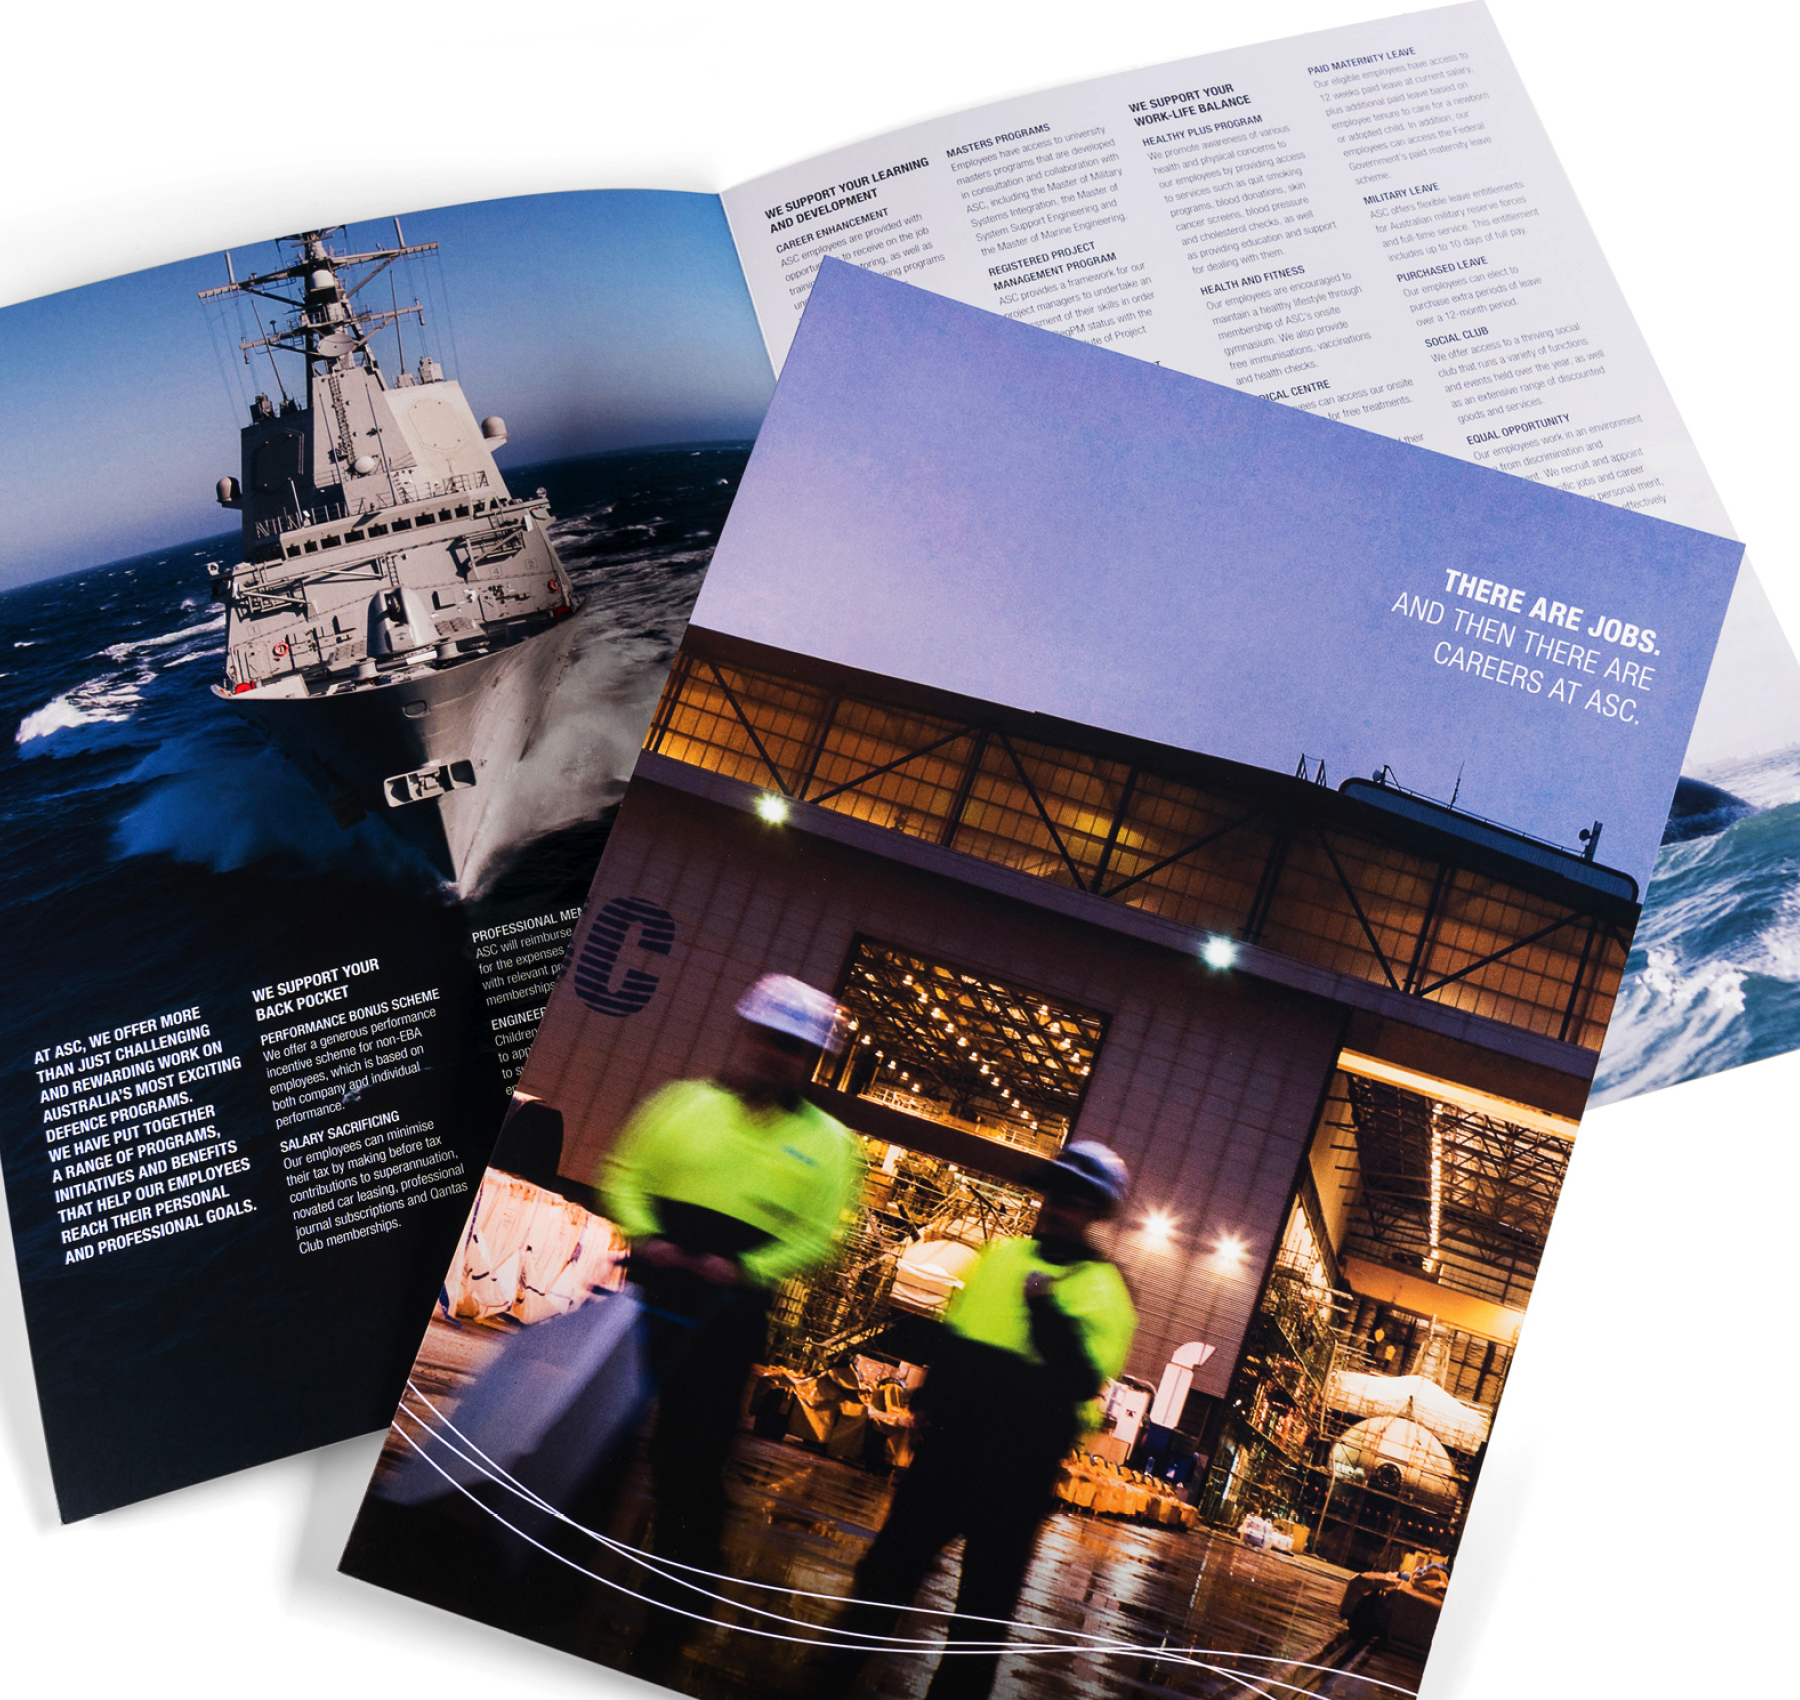 ASC (Formerly known as Australian Submarine Corporation) - Strategic communications support.With more than 2,500 employees across three facilities in South Australia and Western Australia, ASC is Australia’s largest specialised defence shipbuilding organisation. CASTONDESIGN assists ASC with the design and production of all internal and external communication materials. Our support ranges from developing employee engagement strategies and training materials, through to producing high level executive documents and community open day and tradeshow materials.